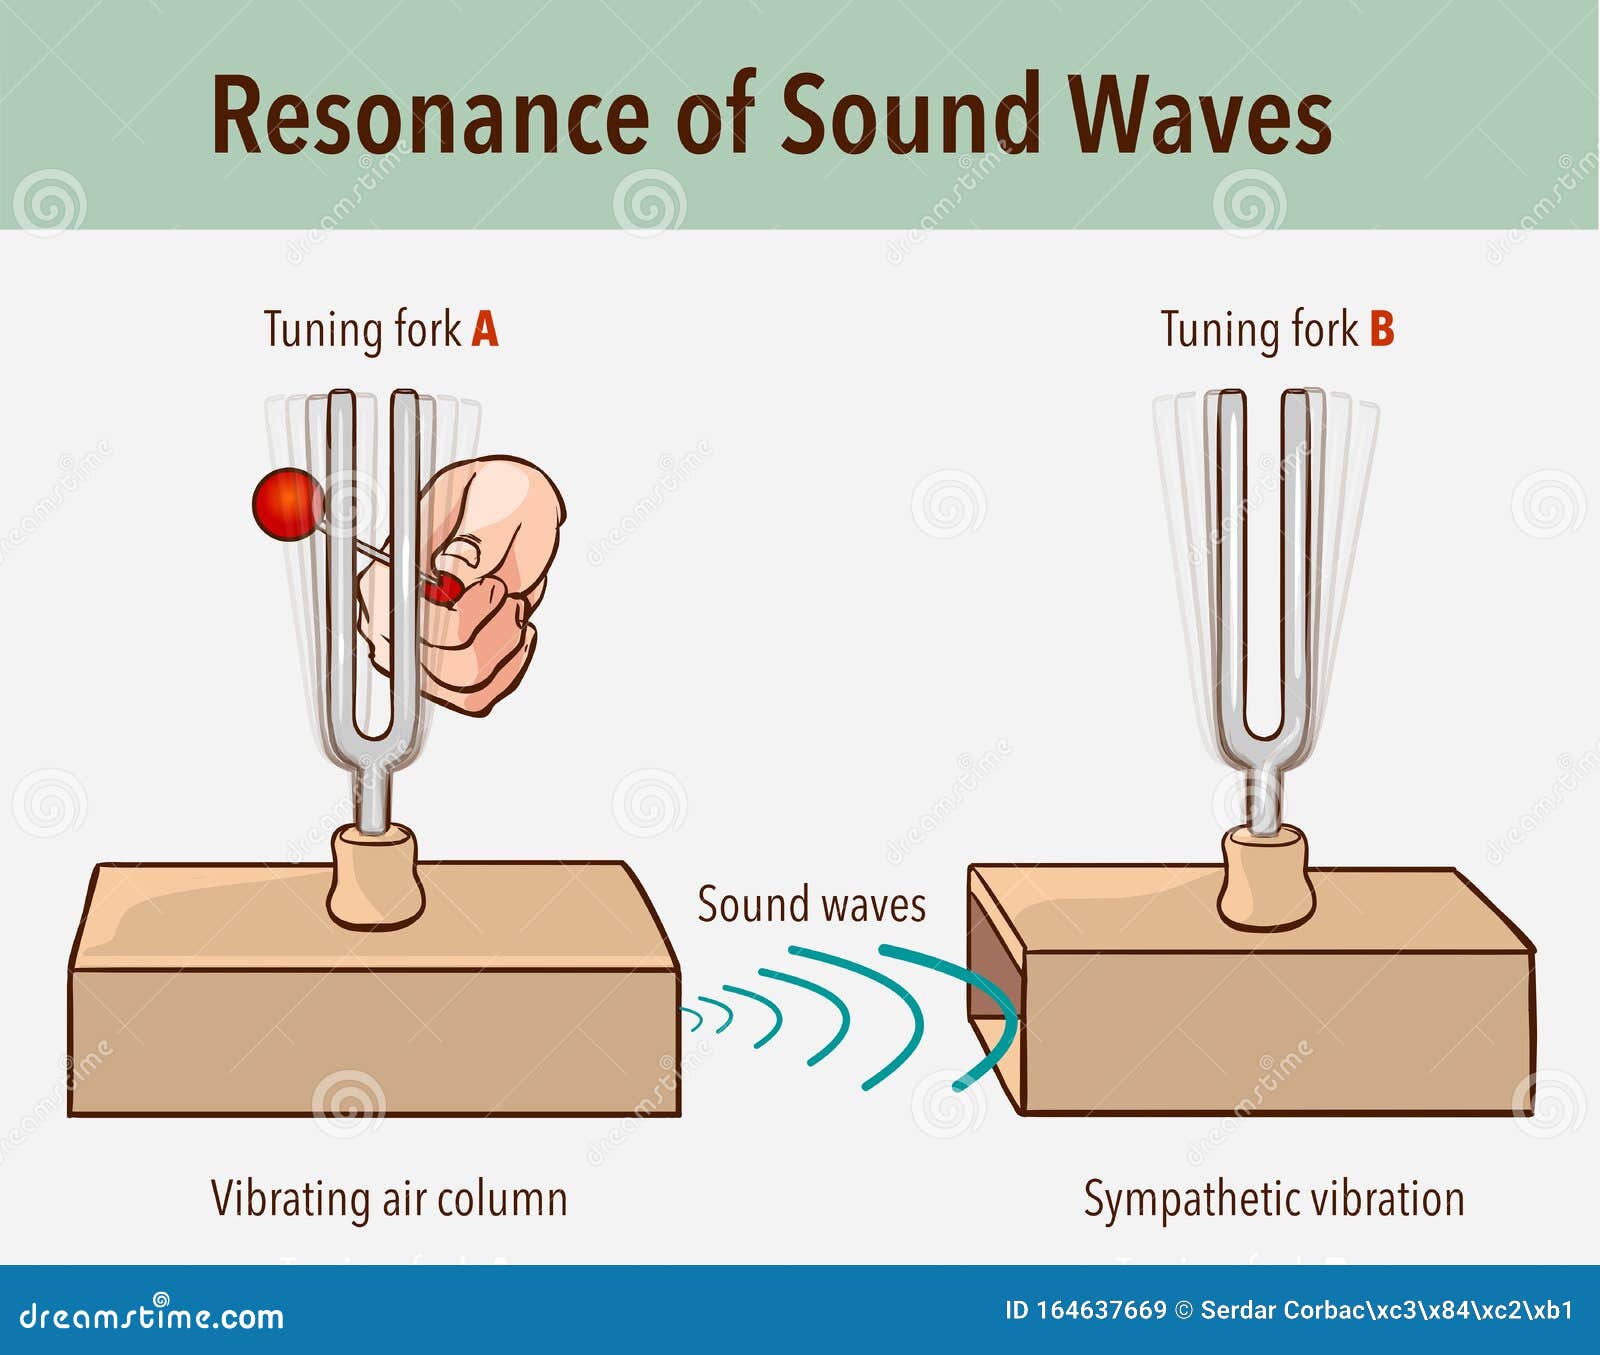 tuning fork resonance experiment. when one tuning fork is struck, the other tuning fork of the same frequency will also vibrate in